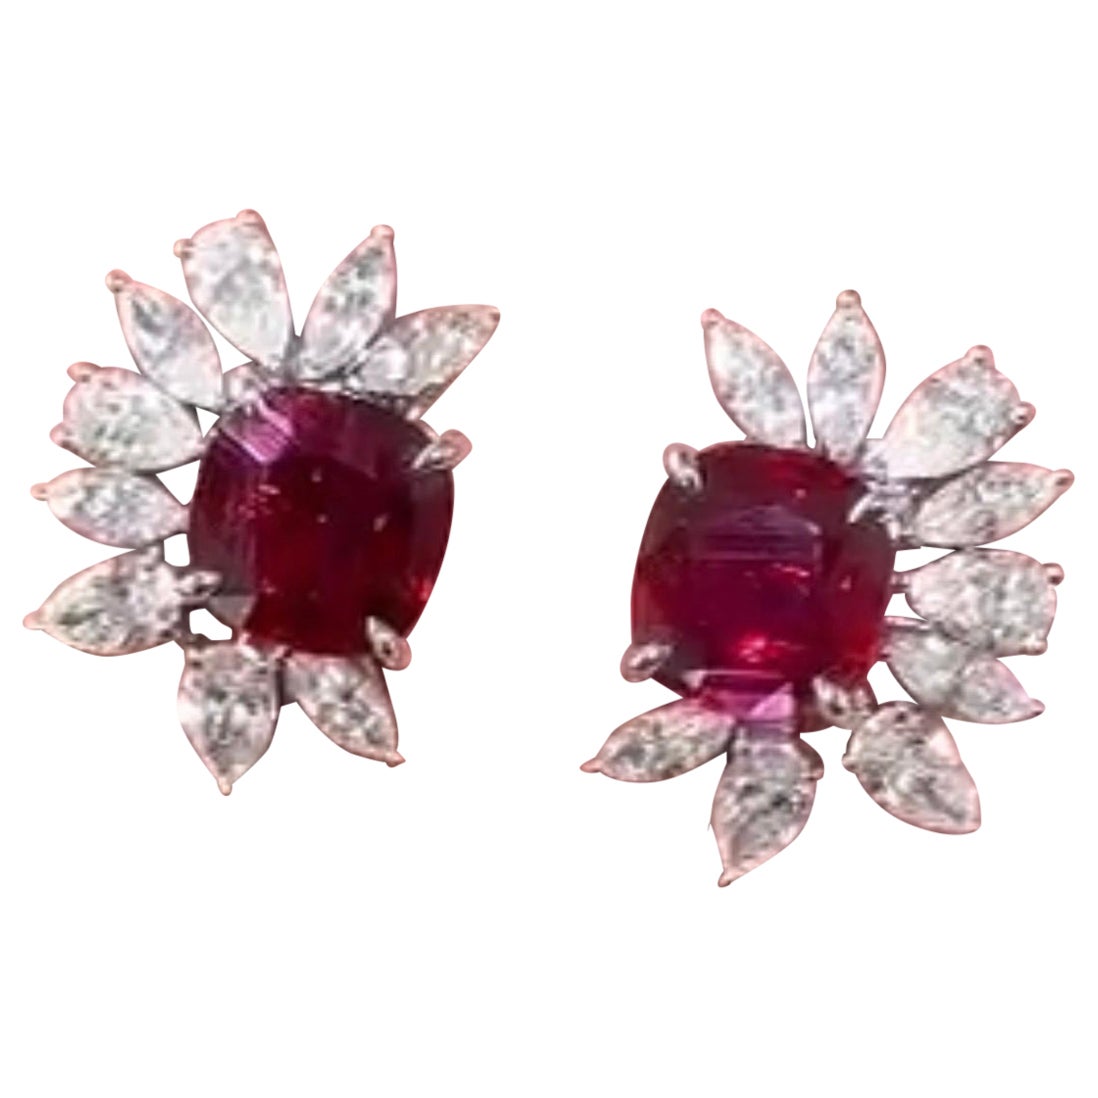 Certified 4.06 Carat Natural Ruby and Diamond Studs